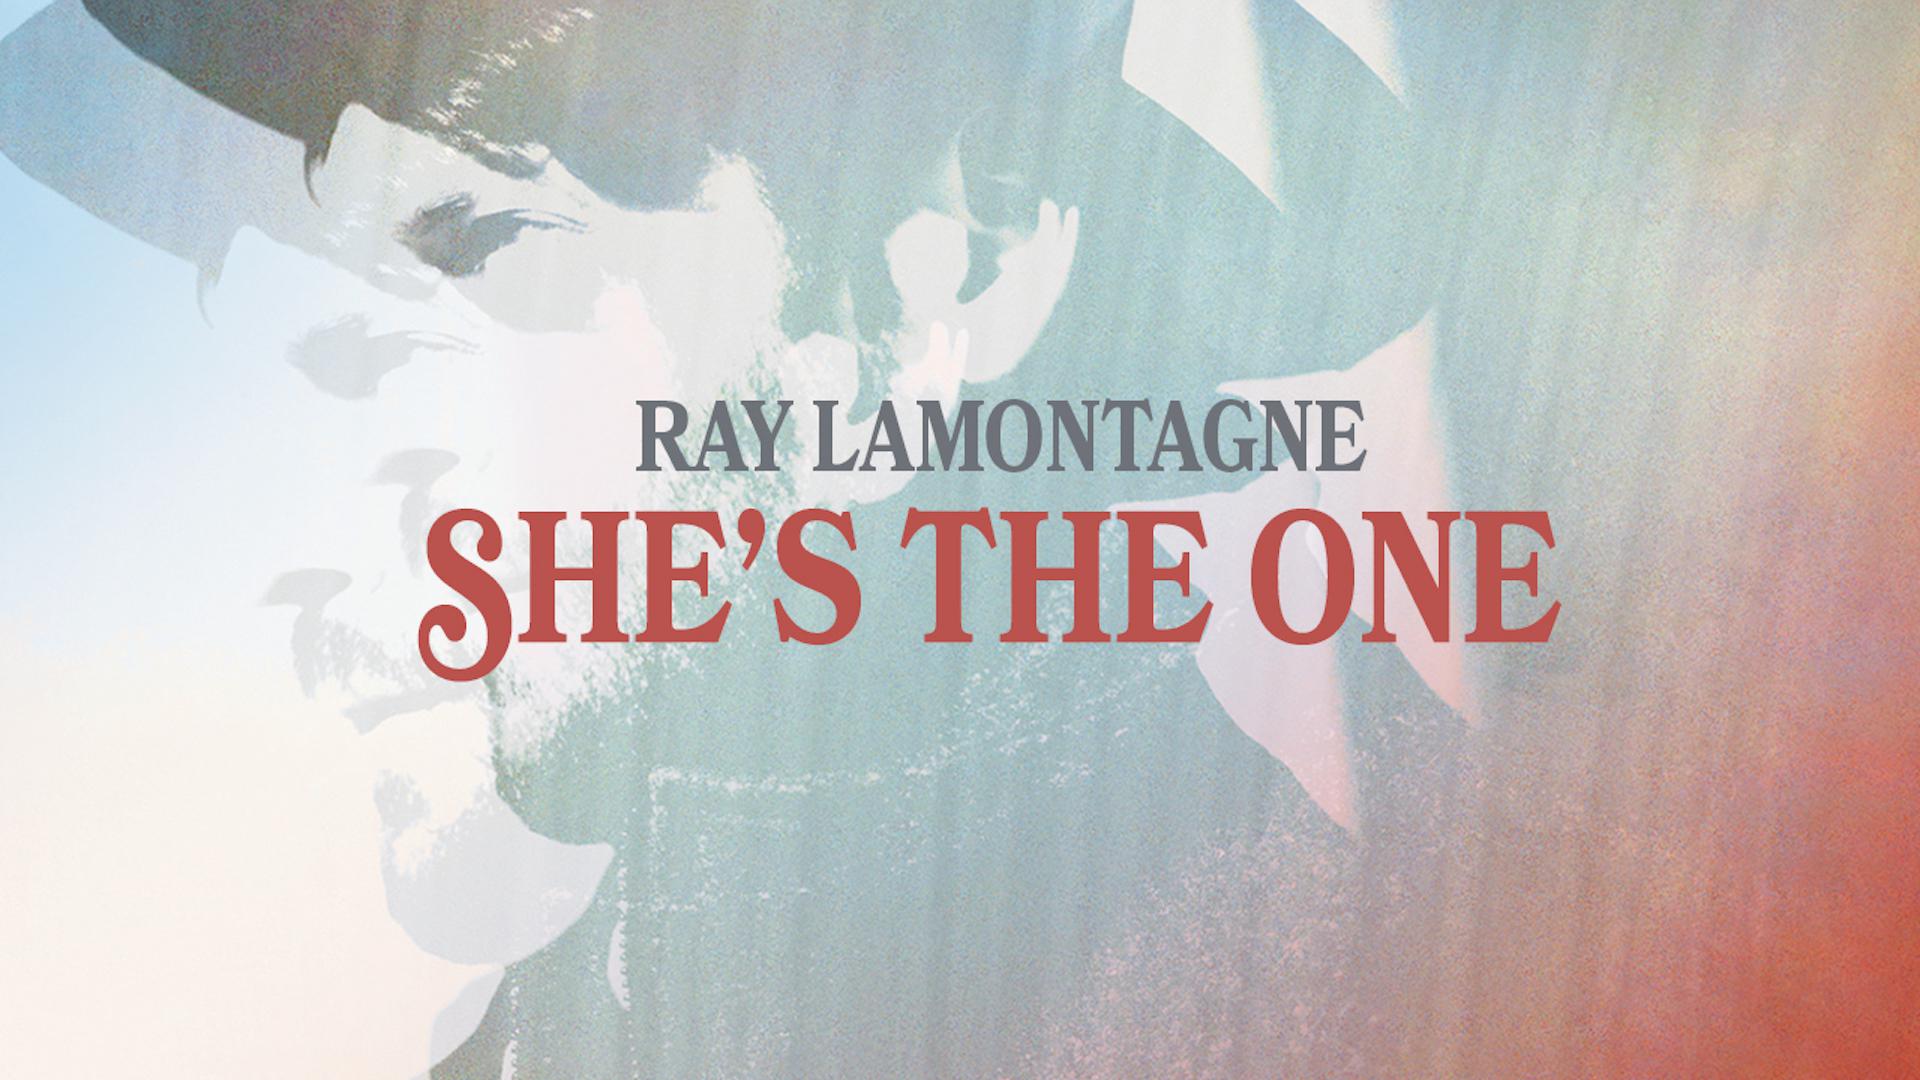 Ray LaMontagne - She's the One (Audio)